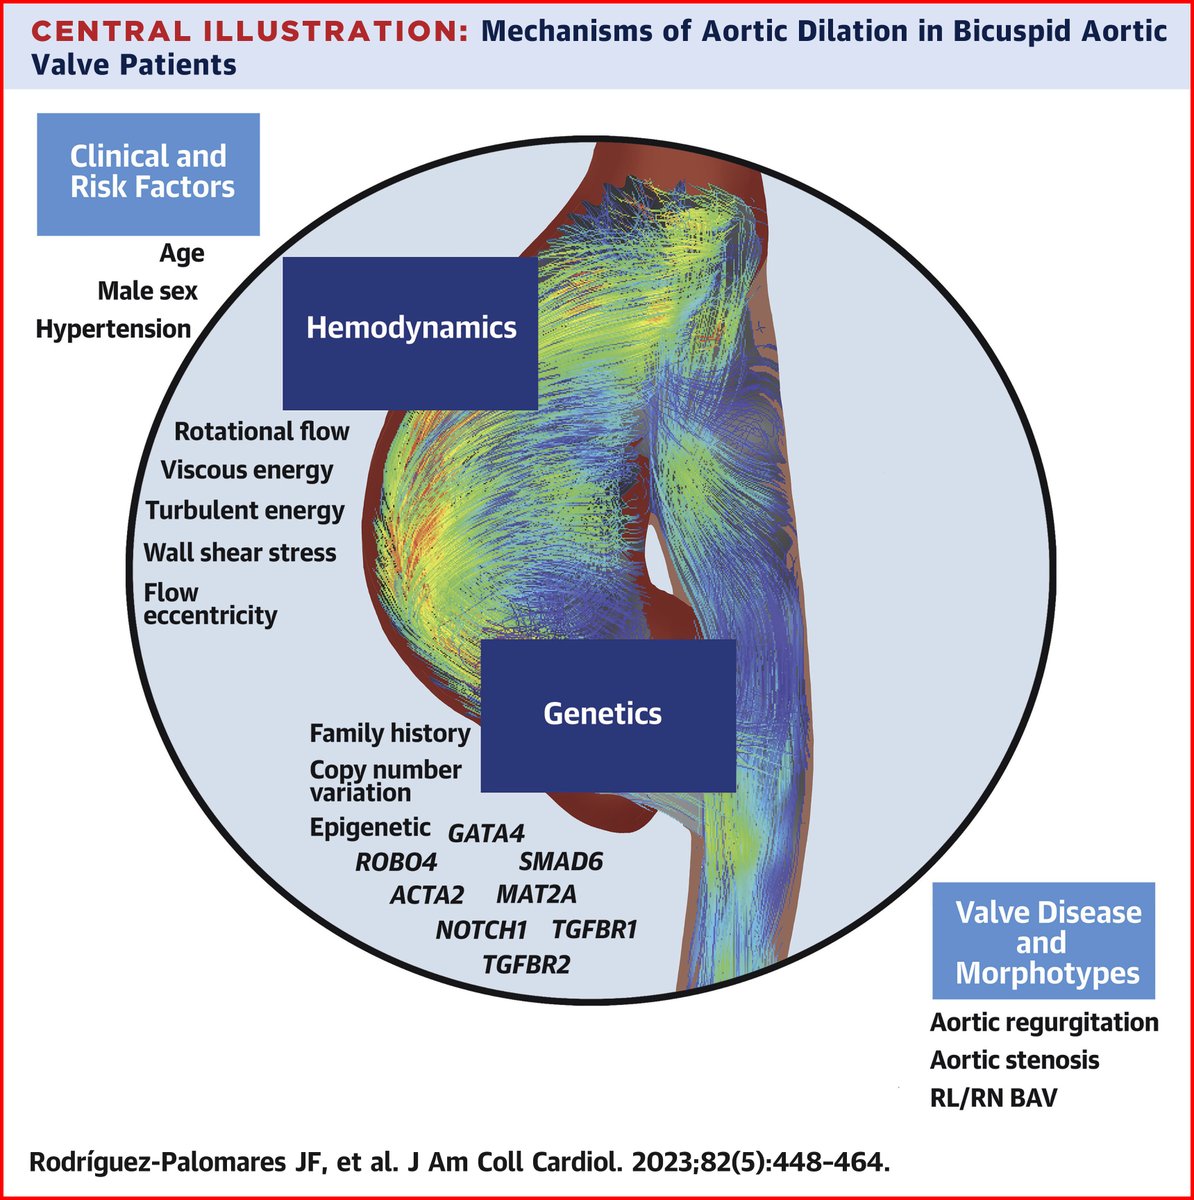 🆕 JACC State-Of-The-Art Review: Mechanisms of Aortic Dilation in Patients With Bicuspid Aortic Valve Read the key points from the review here: bit.ly/3KEPJ9R #JACC